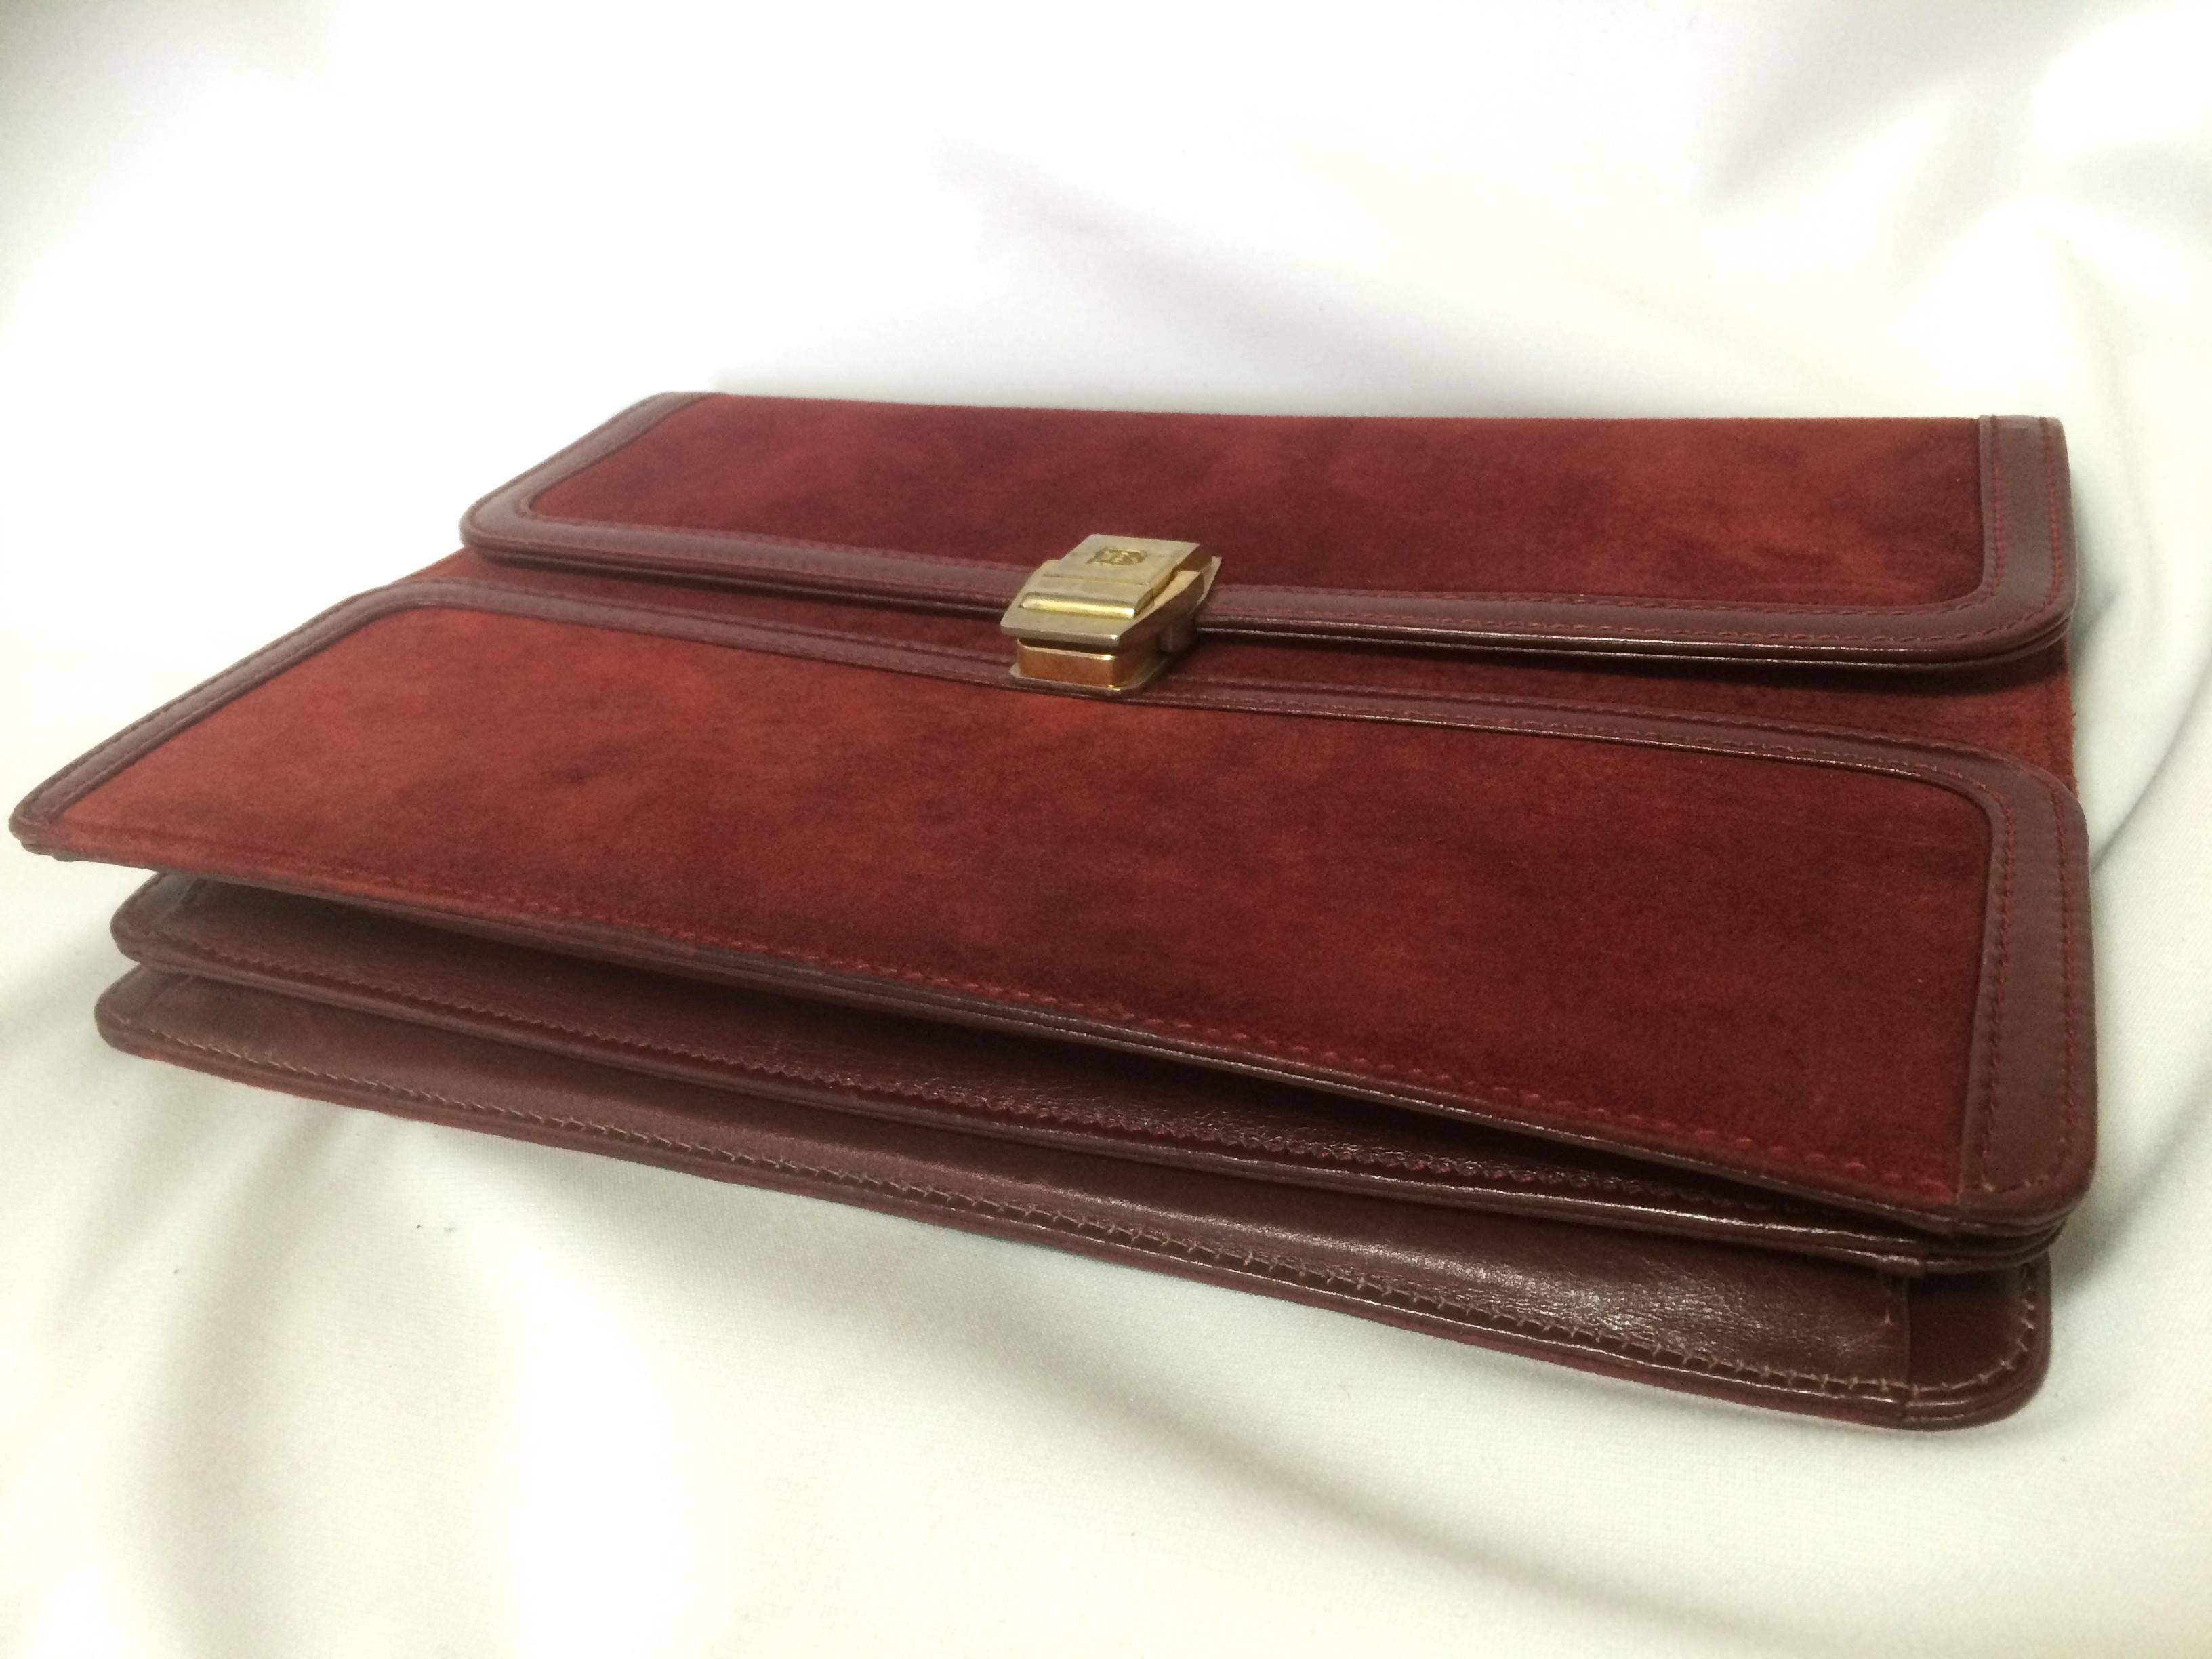 Vintage BALLY genuine wine suede leather clutch bag, mini purse with golden logo In Good Condition For Sale In Kashiwa, Chiba